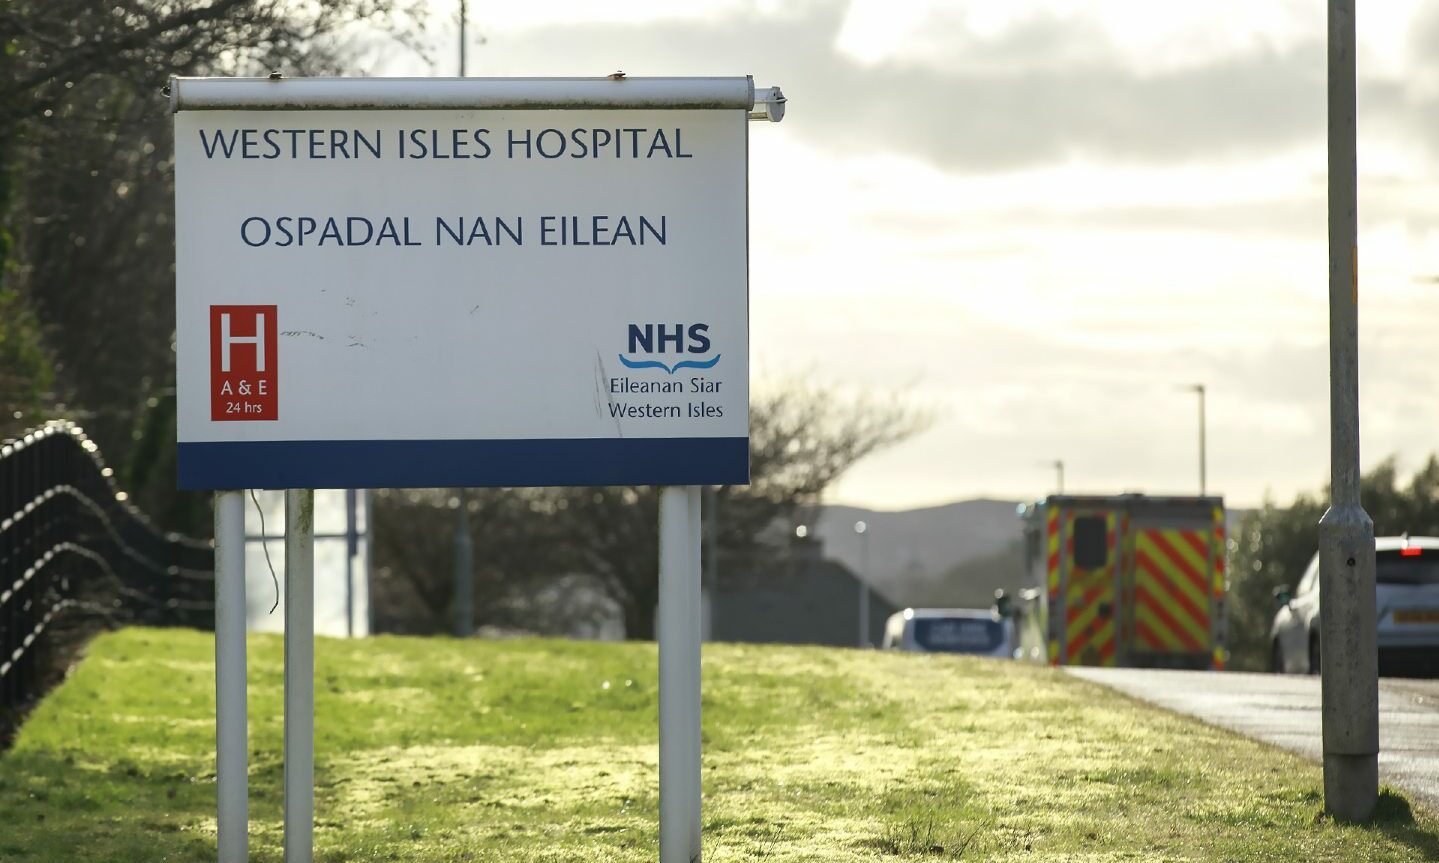 Inspectors said staff at Western Isles Hospital felt well-supported.